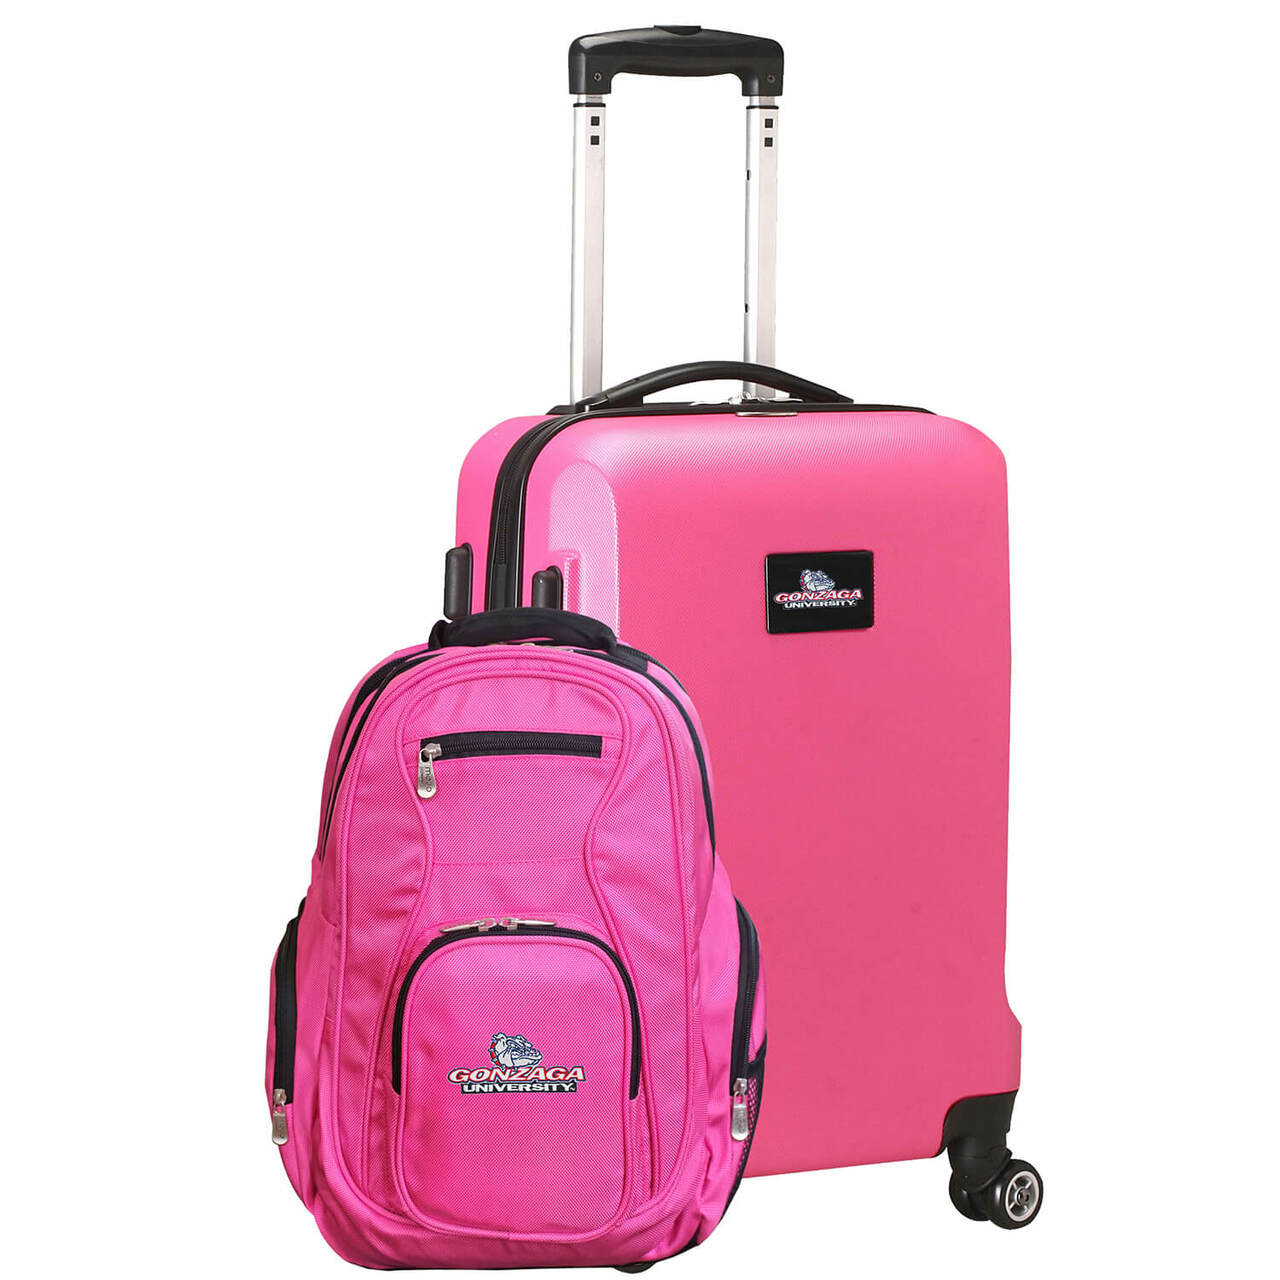 Gonzaga University Bulldogs Deluxe 2-Piece Backpack and Carry-on Set in Pink